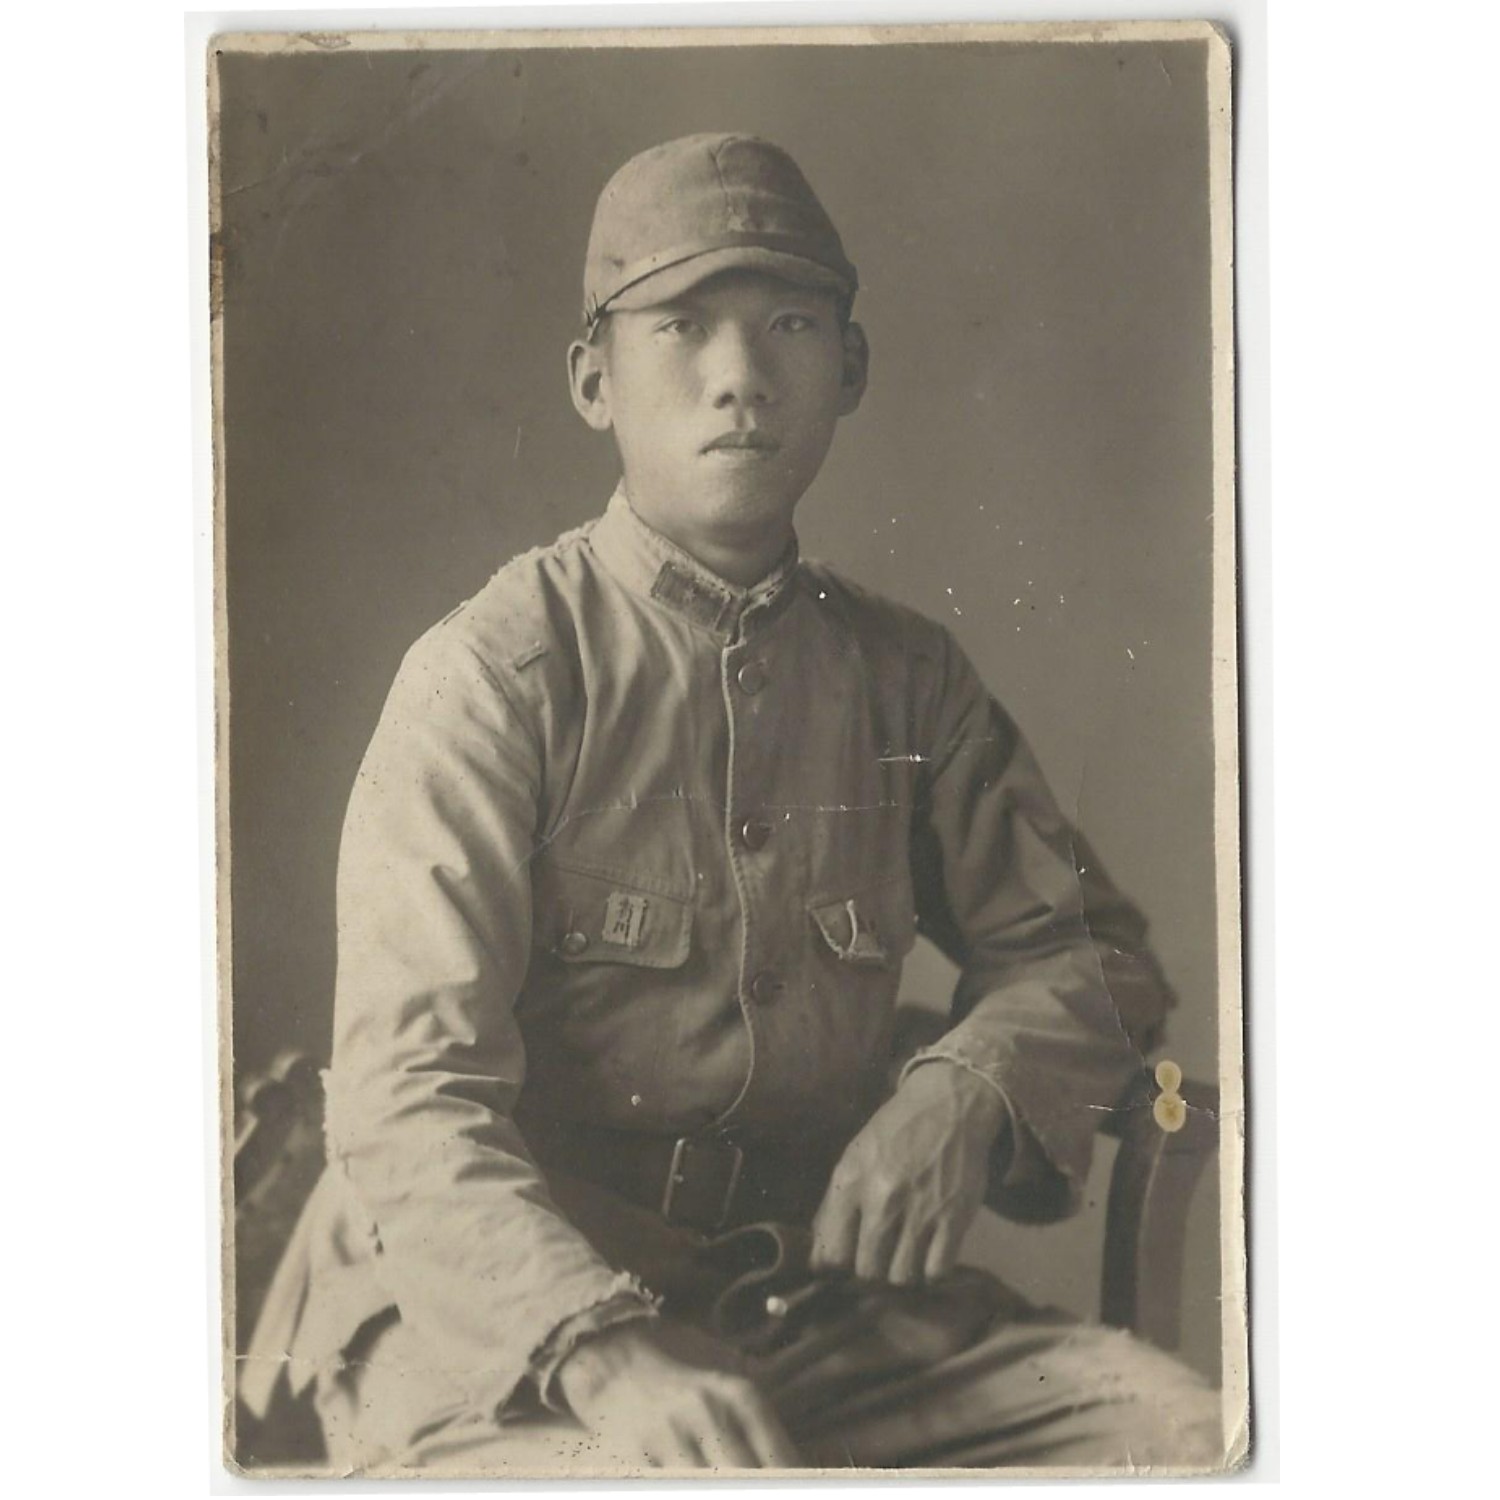 Portrait of a Japanese imperial army soldier